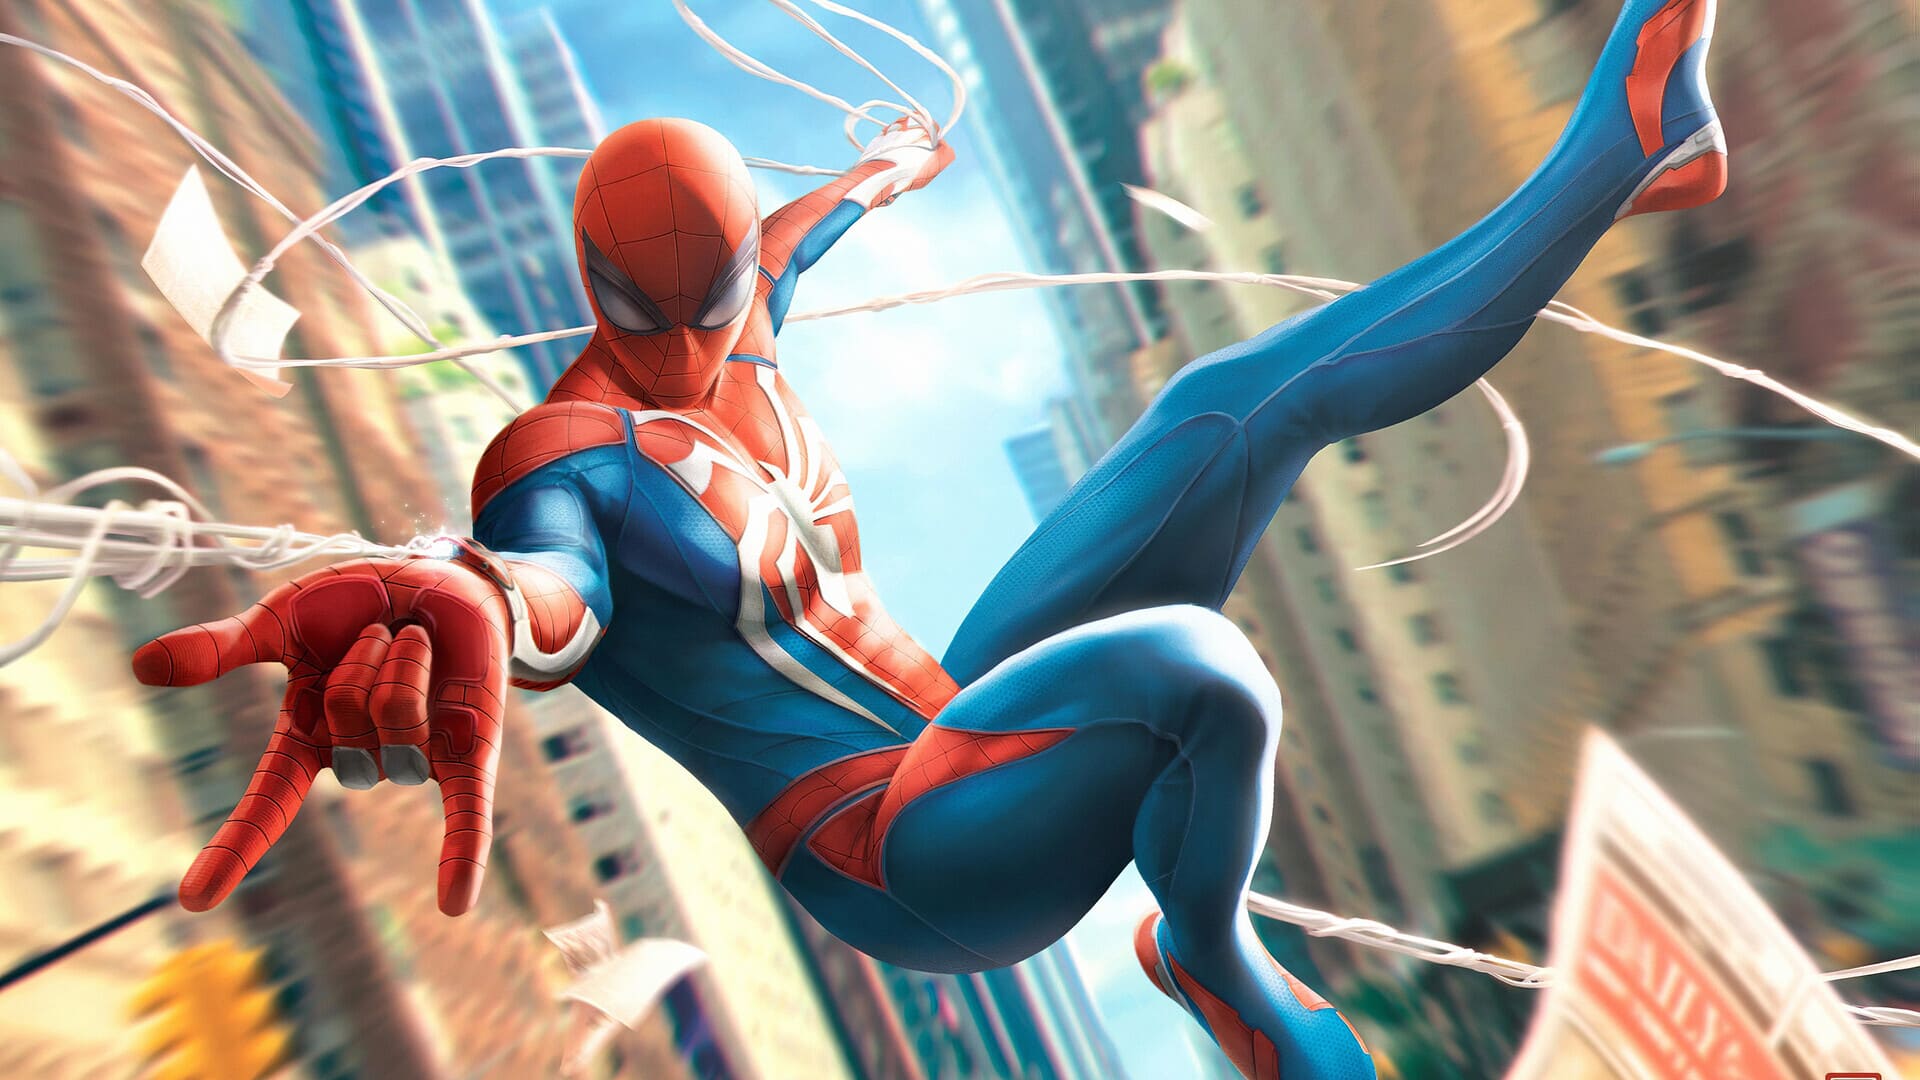 Spiderman PC Wallpapers.